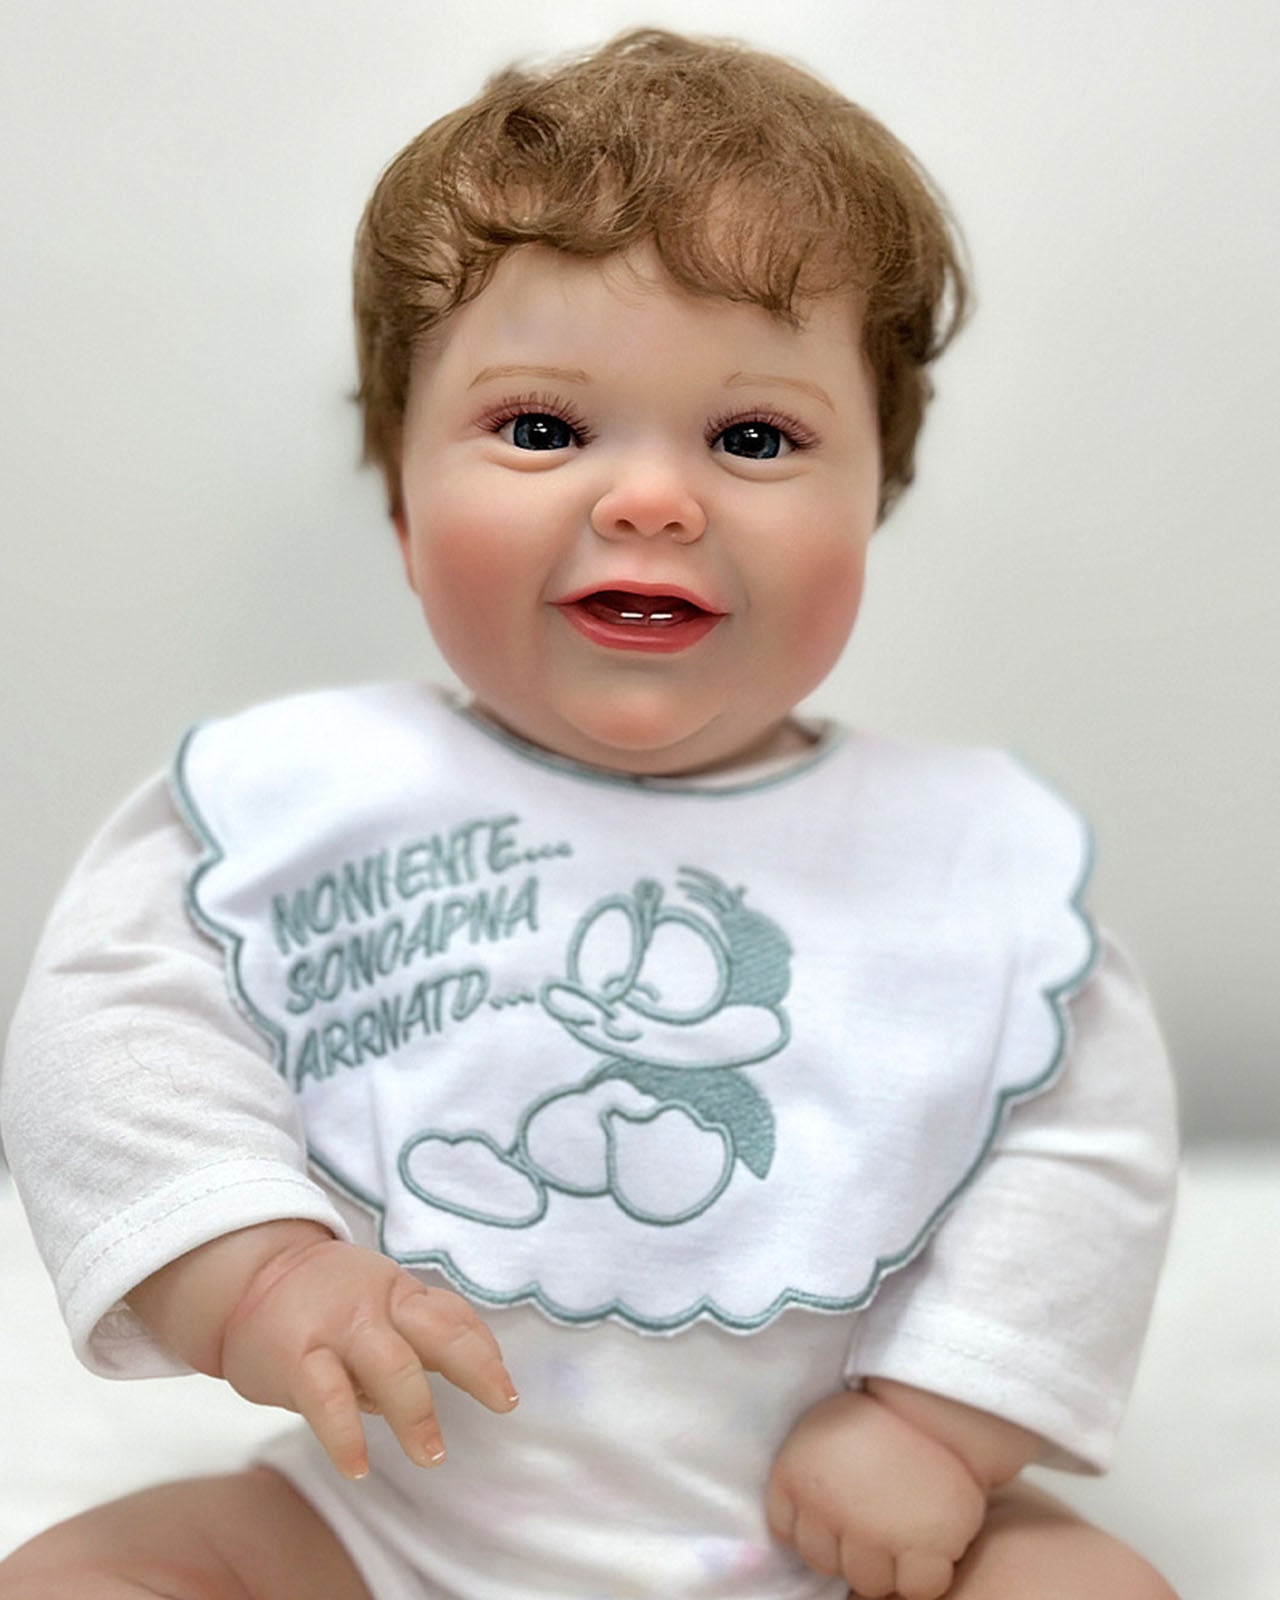 22-inch 1.7 kg Reborn Baby Doll toothy smiling boy - Vacos Store